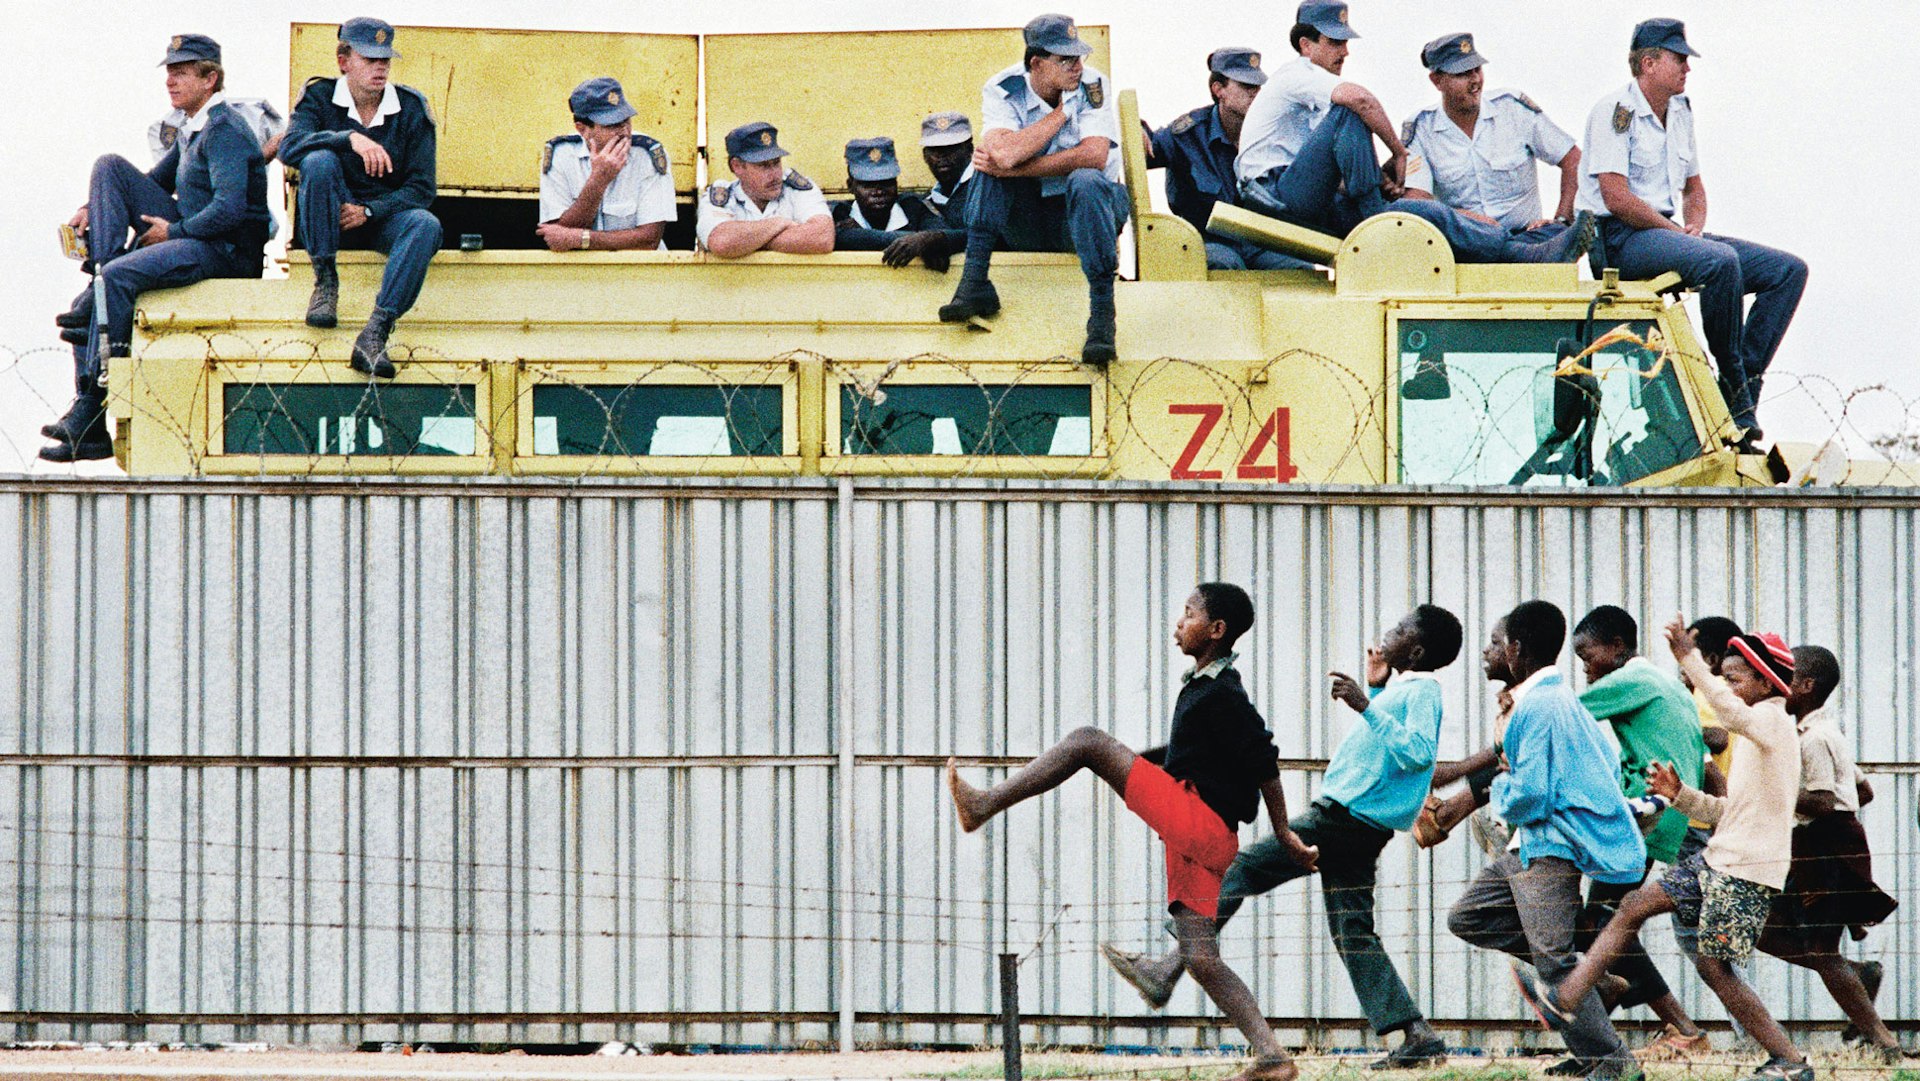 THEN: Youths taunt police during an ANC political rally at the Sam Ntuli Sports Stadium, Thokoza, South Africa, 1991.